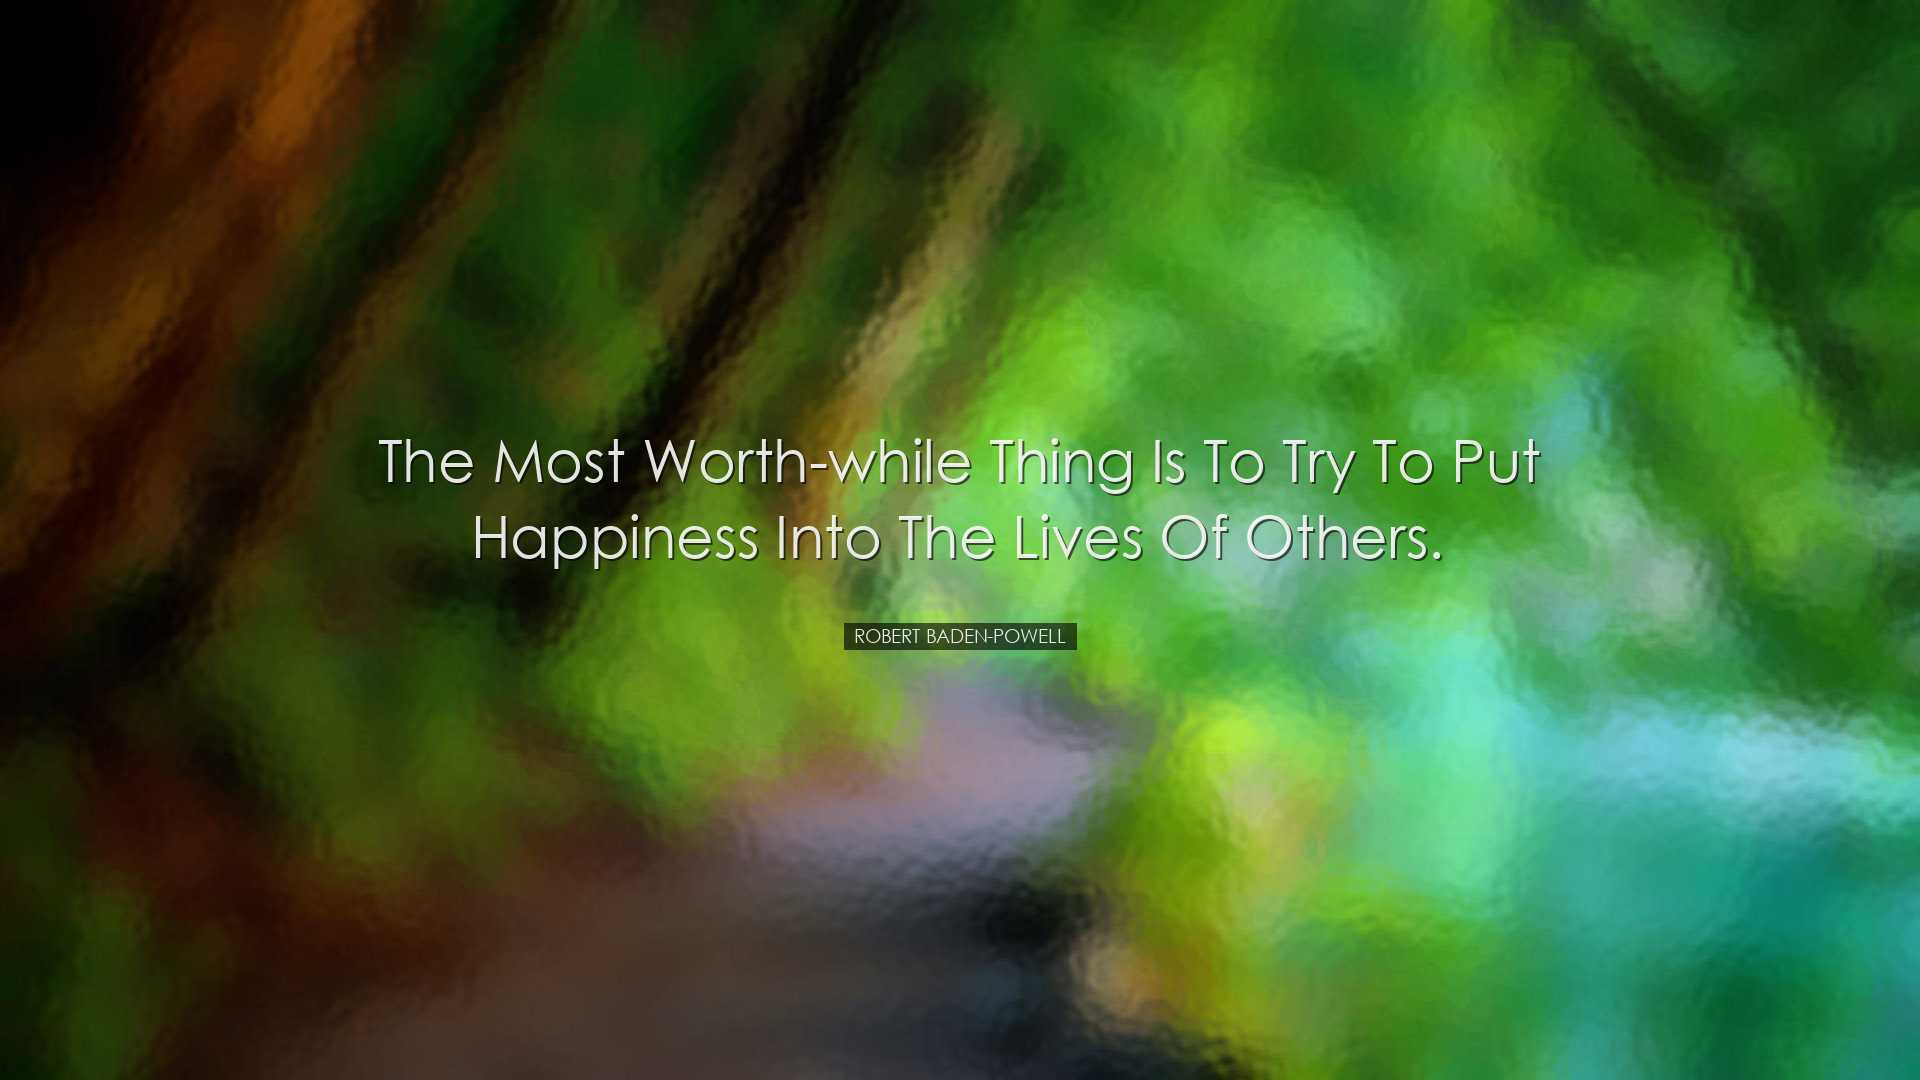 The most worth-while thing is to try to put happiness into the liv